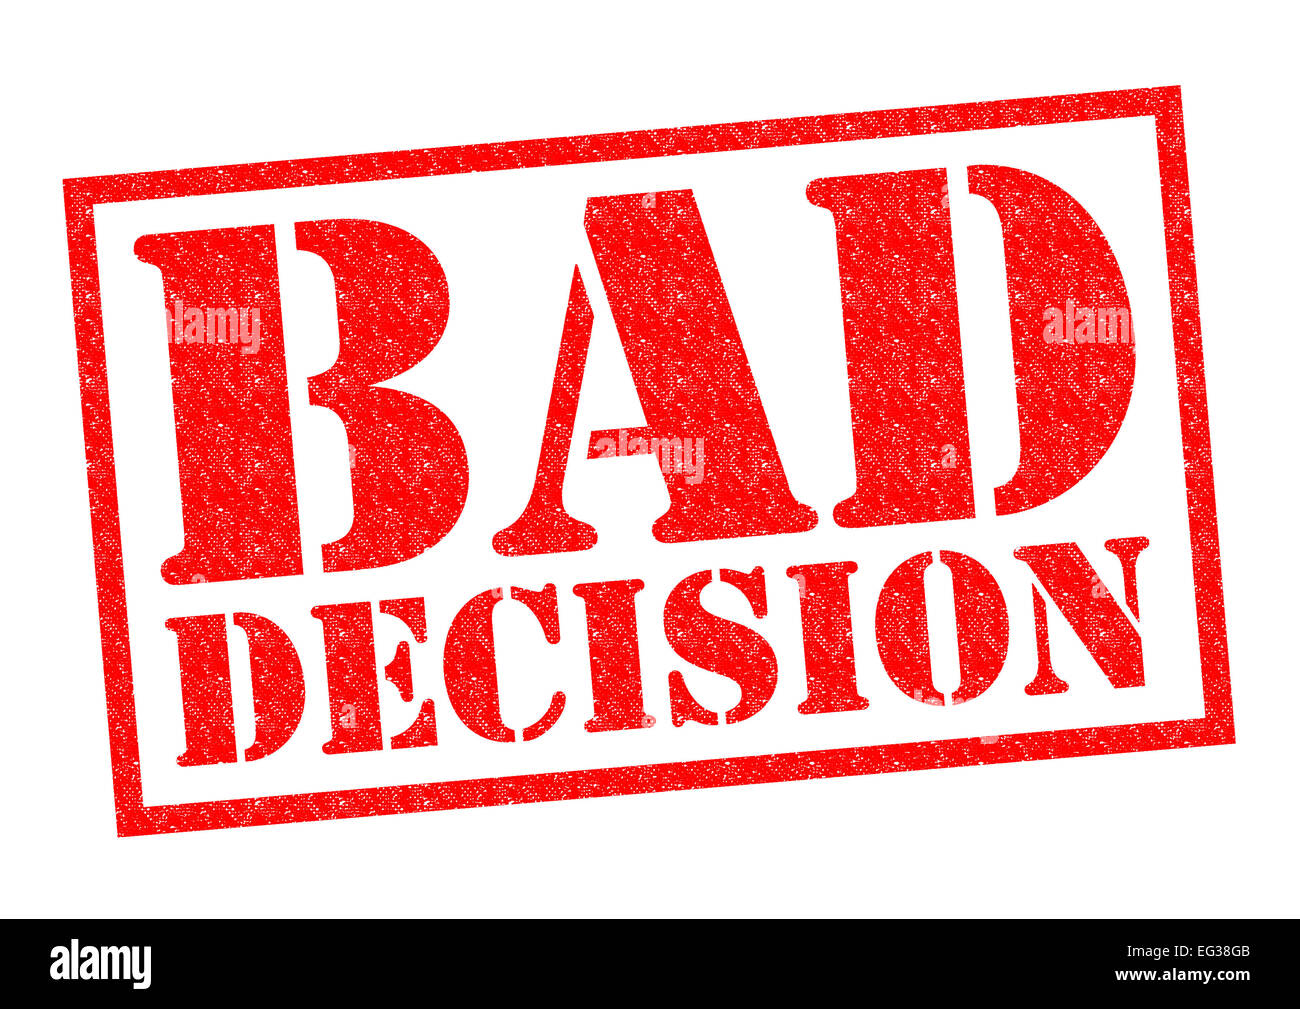 BAD DECISION red Rubber Stamp over a white background. Stock Photo